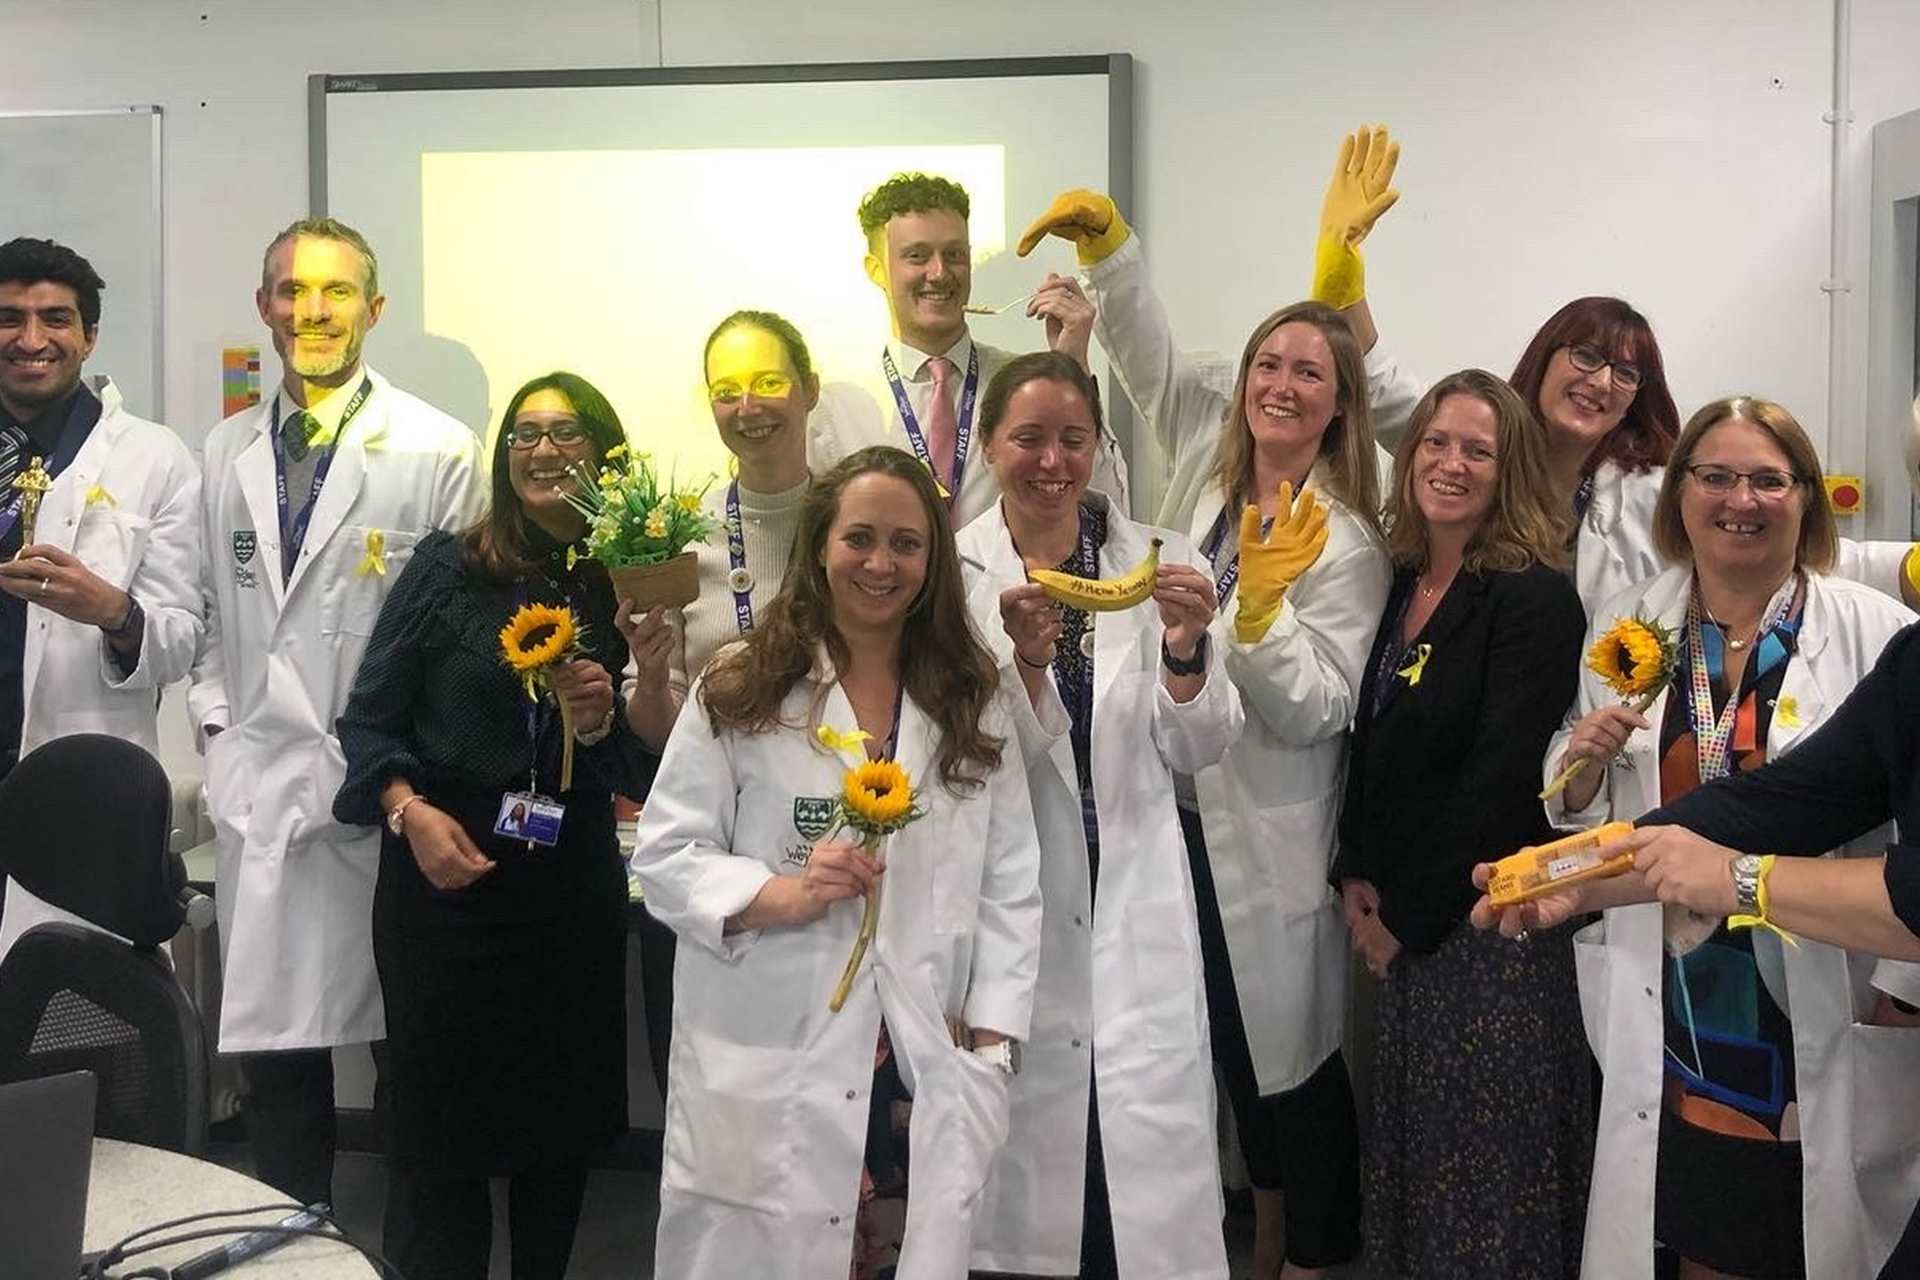 A group of teachers and staff from Weydon School, holding yellow flowers, bananas, and gloves.